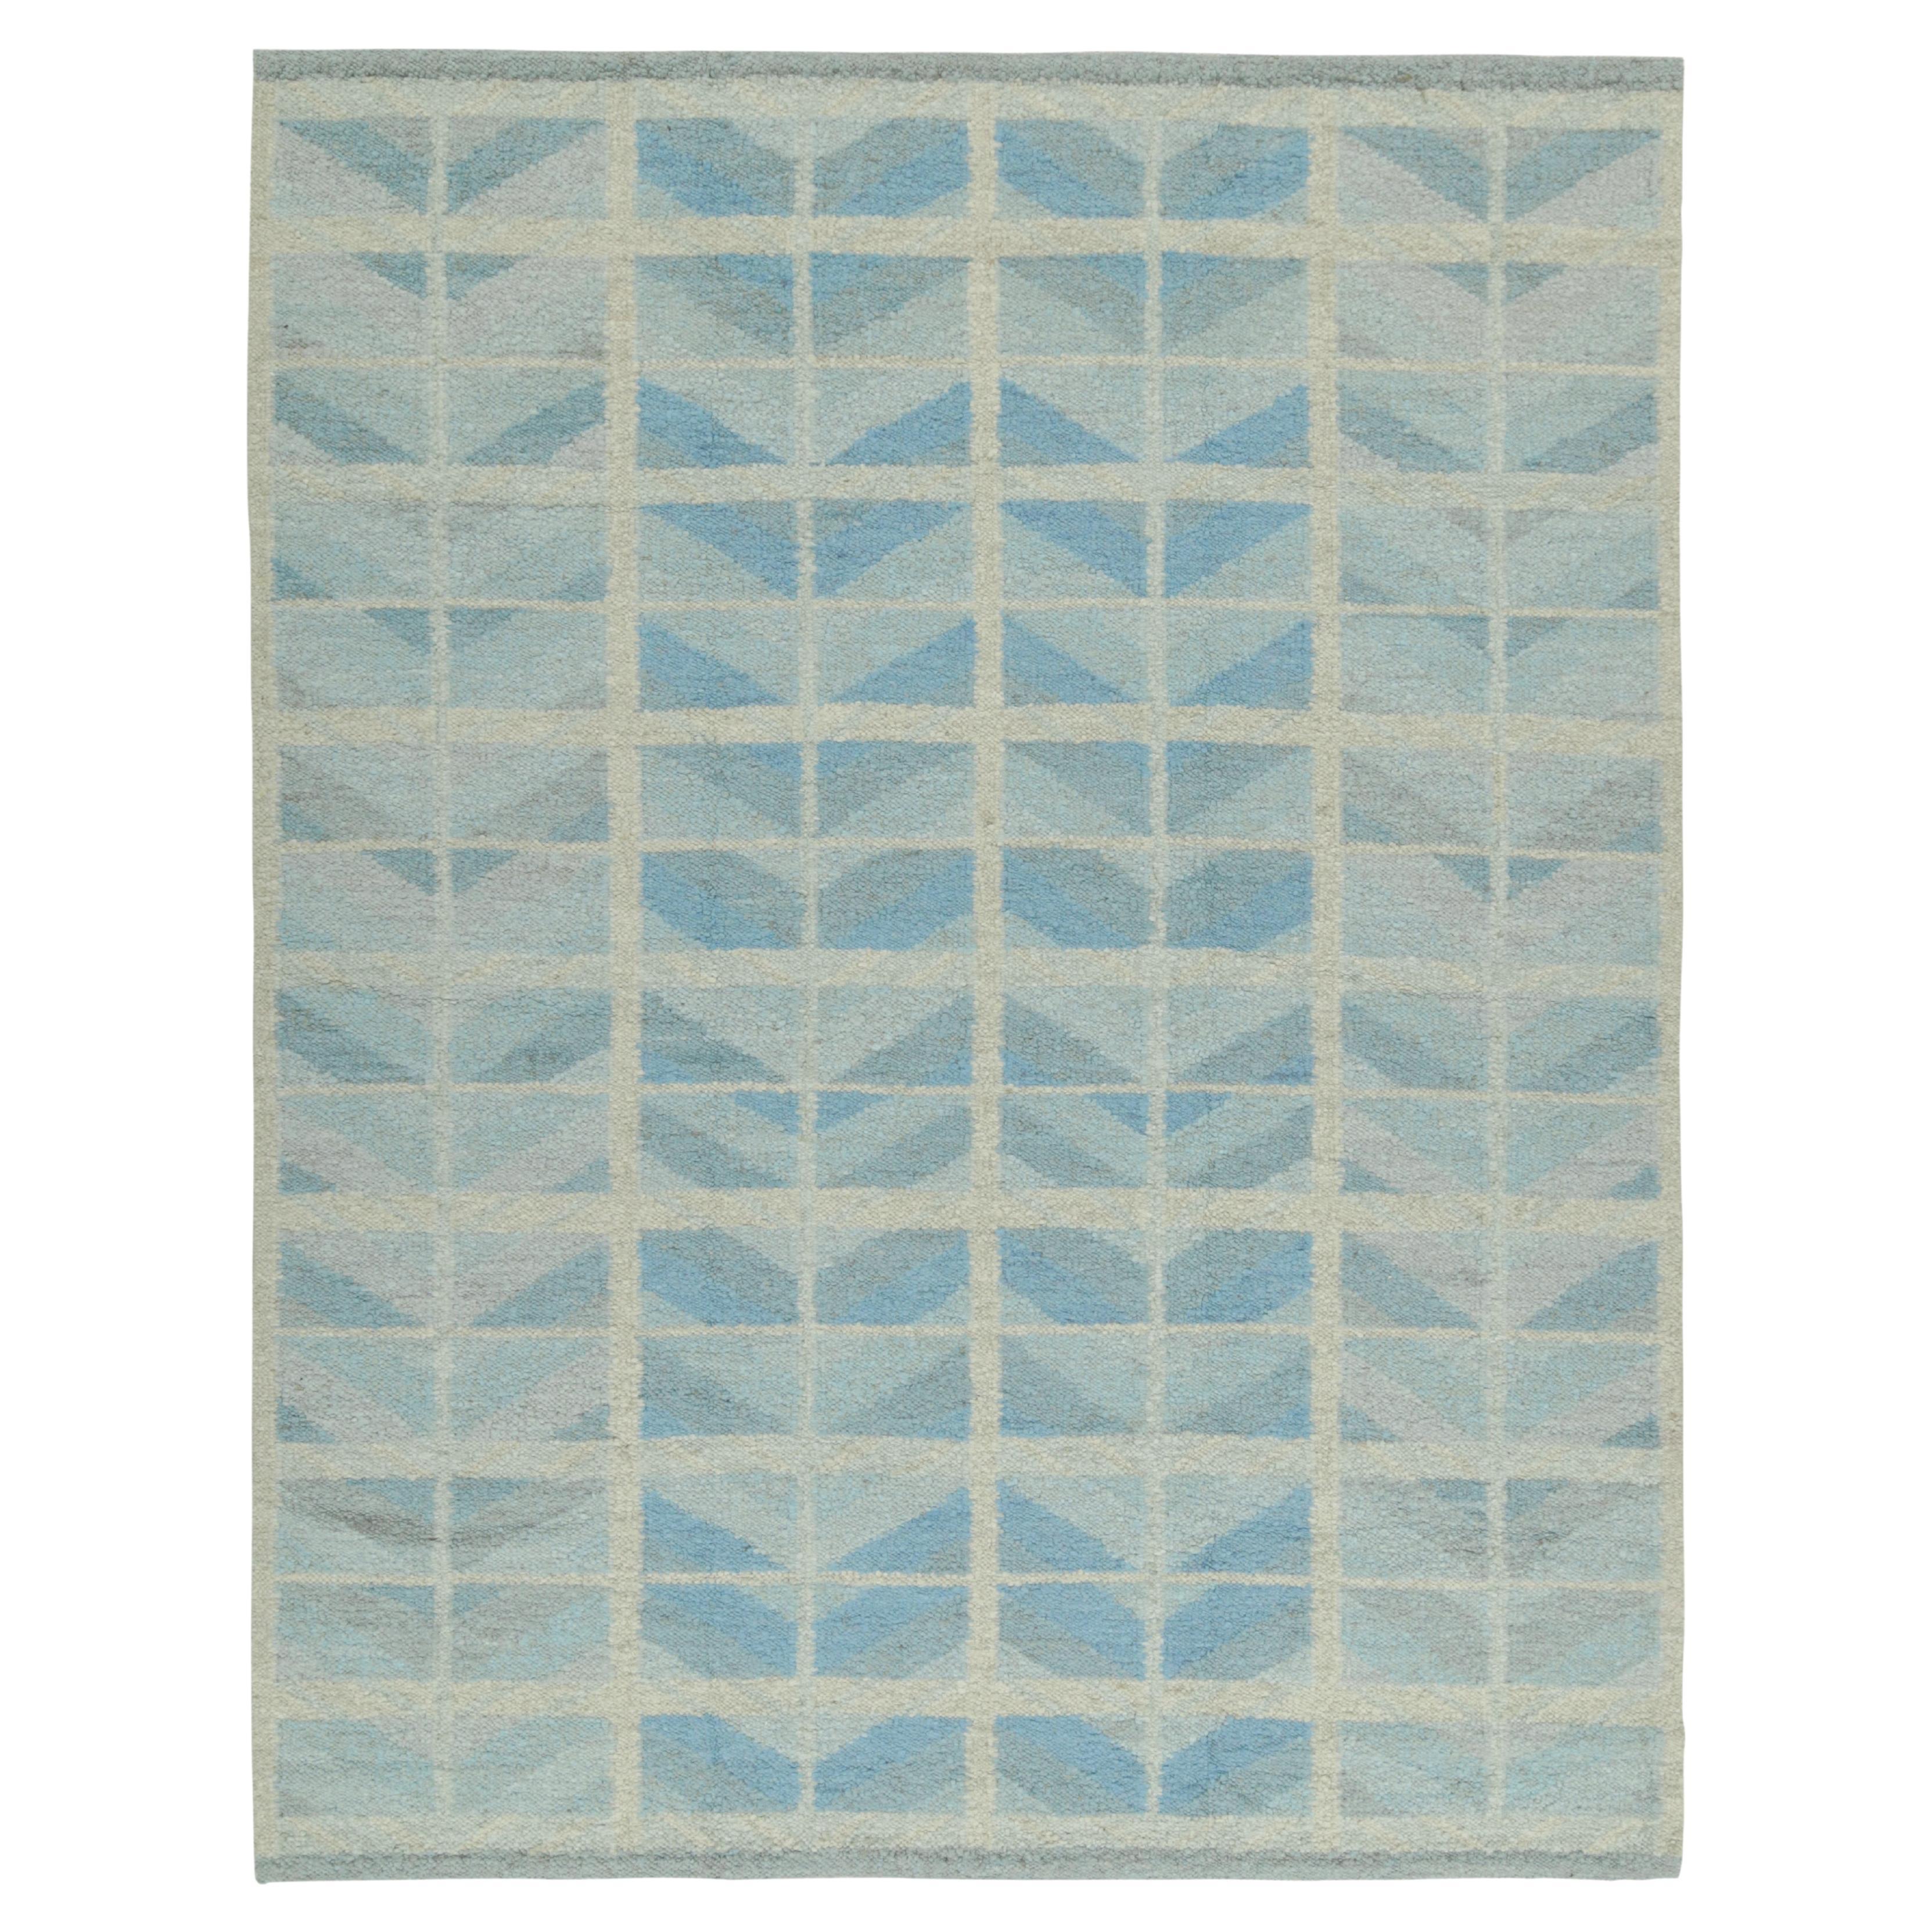 Rug & Kilim’s Scandinavian Style Kilim with Geometric Patterns in Blue & Grey For Sale